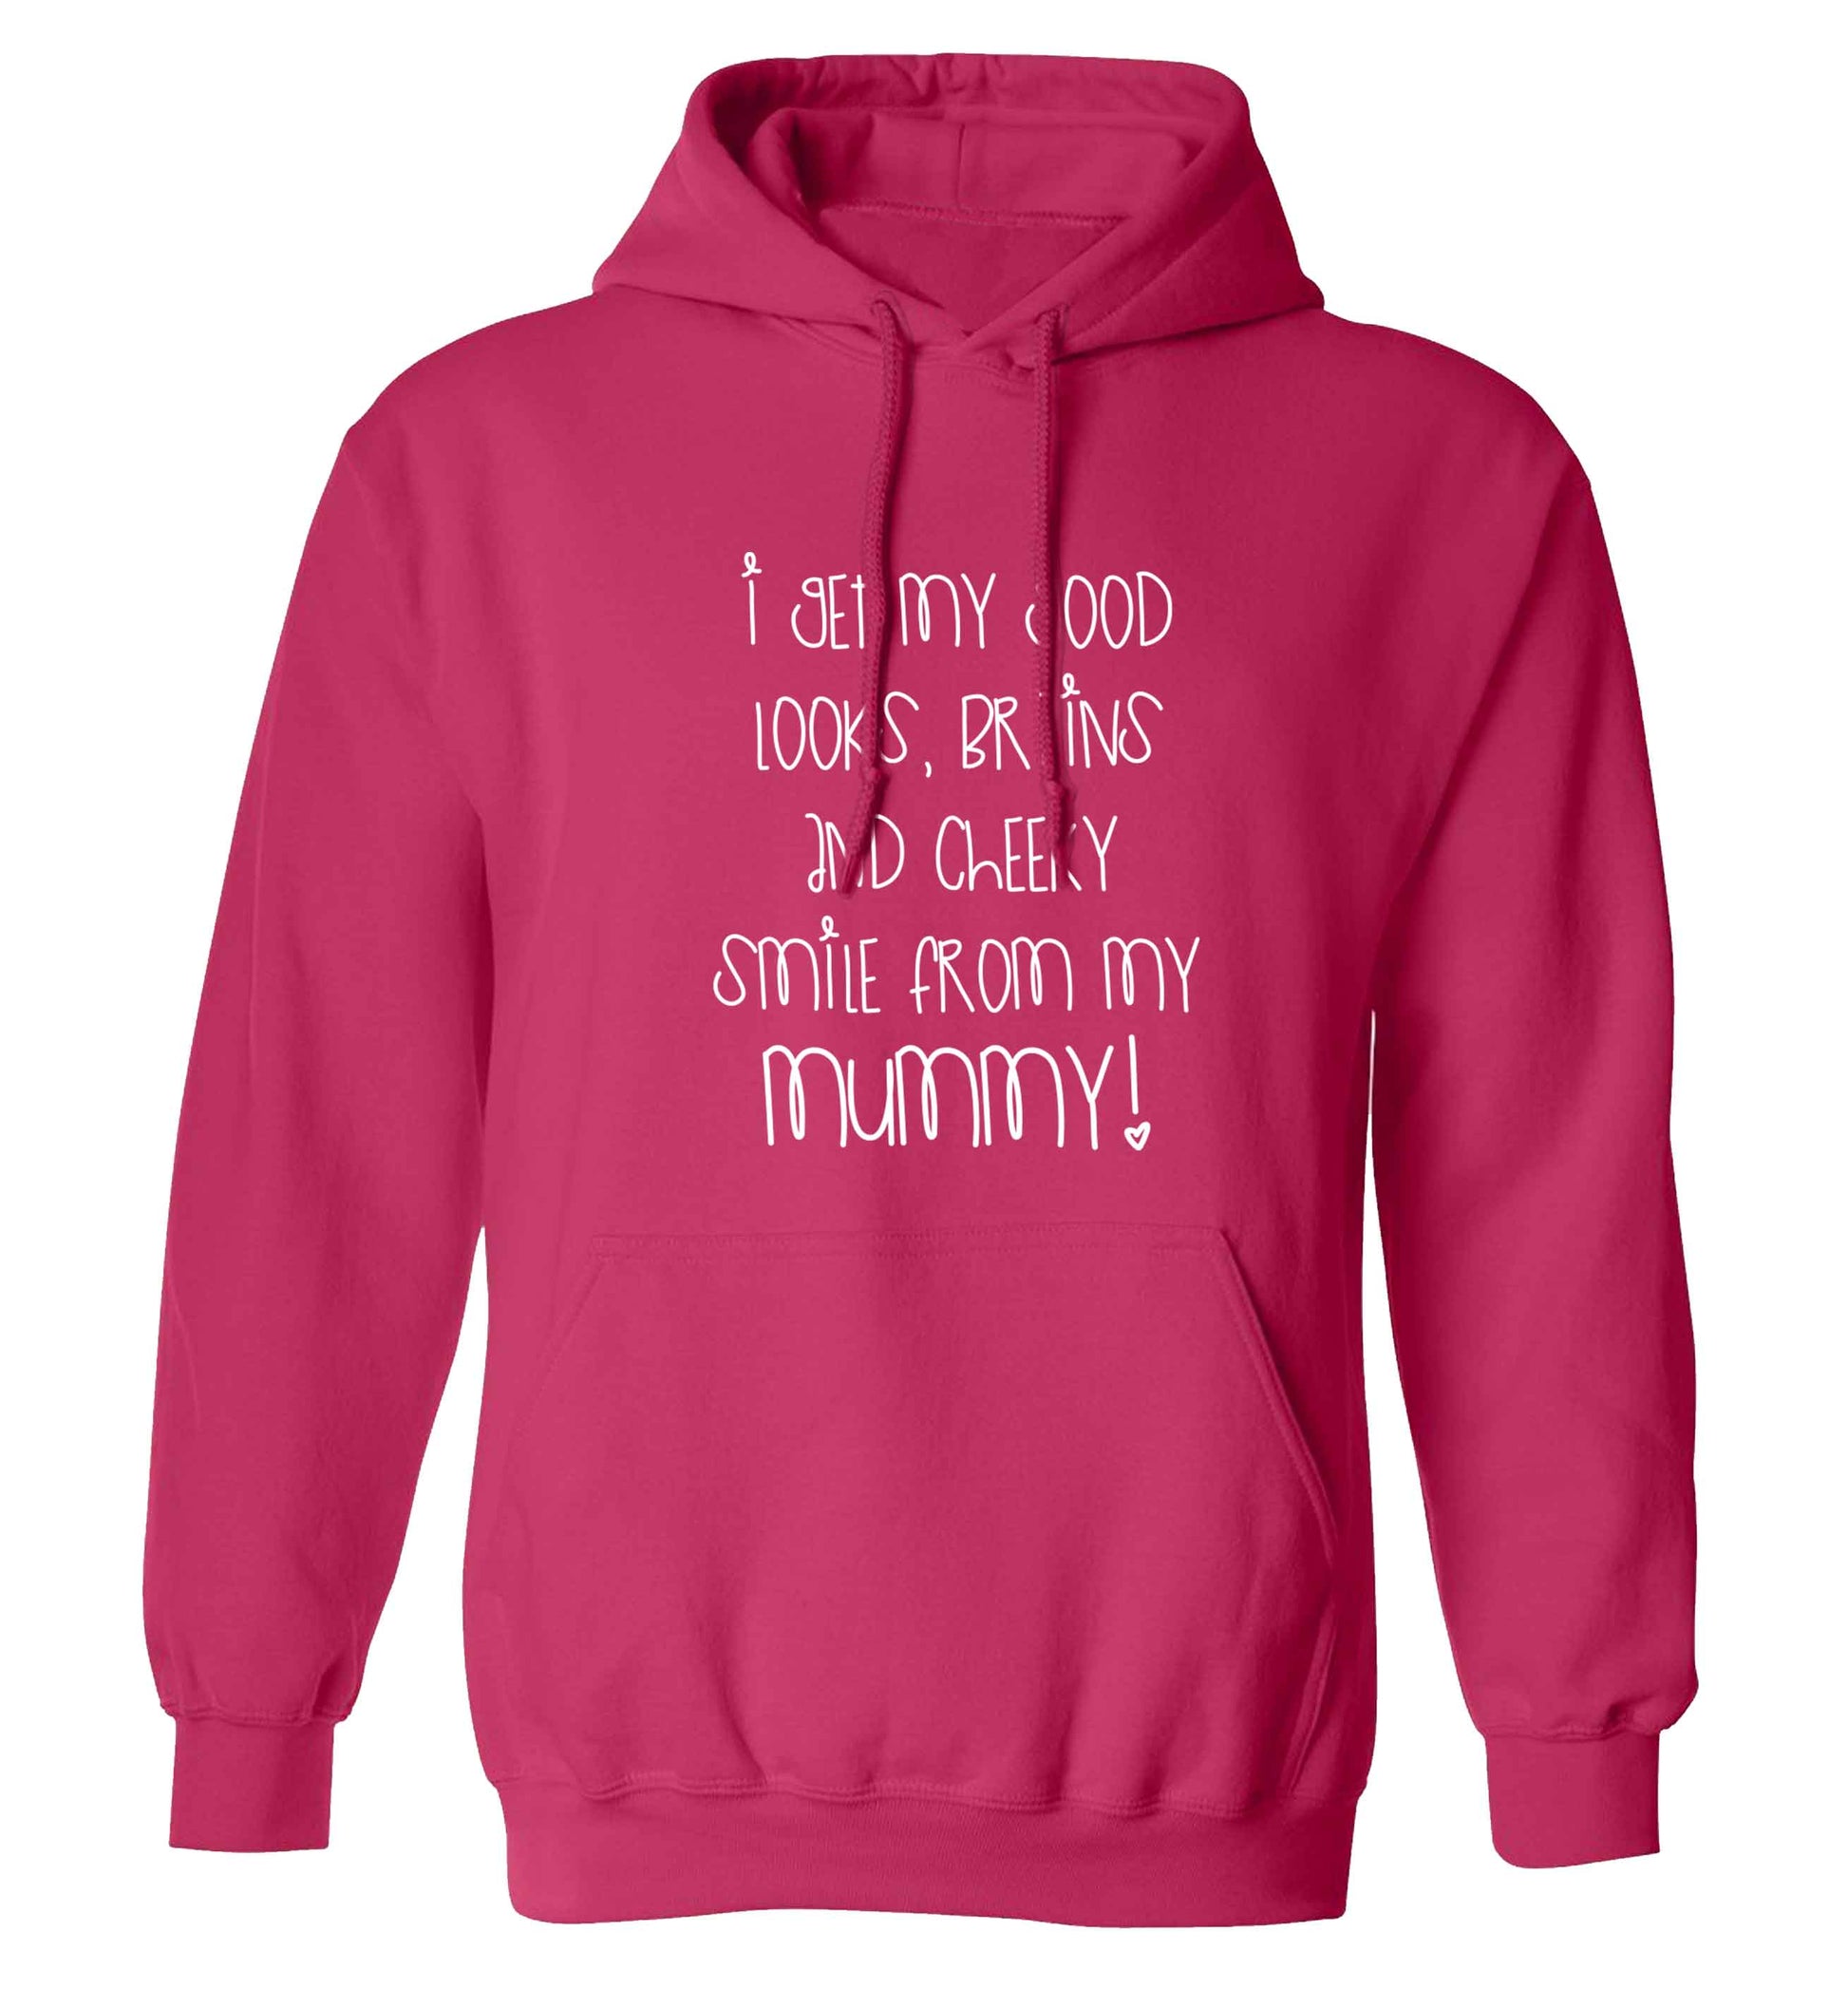 I get my good looks, brains and cheeky smile from my mummy adults unisex pink hoodie 2XL